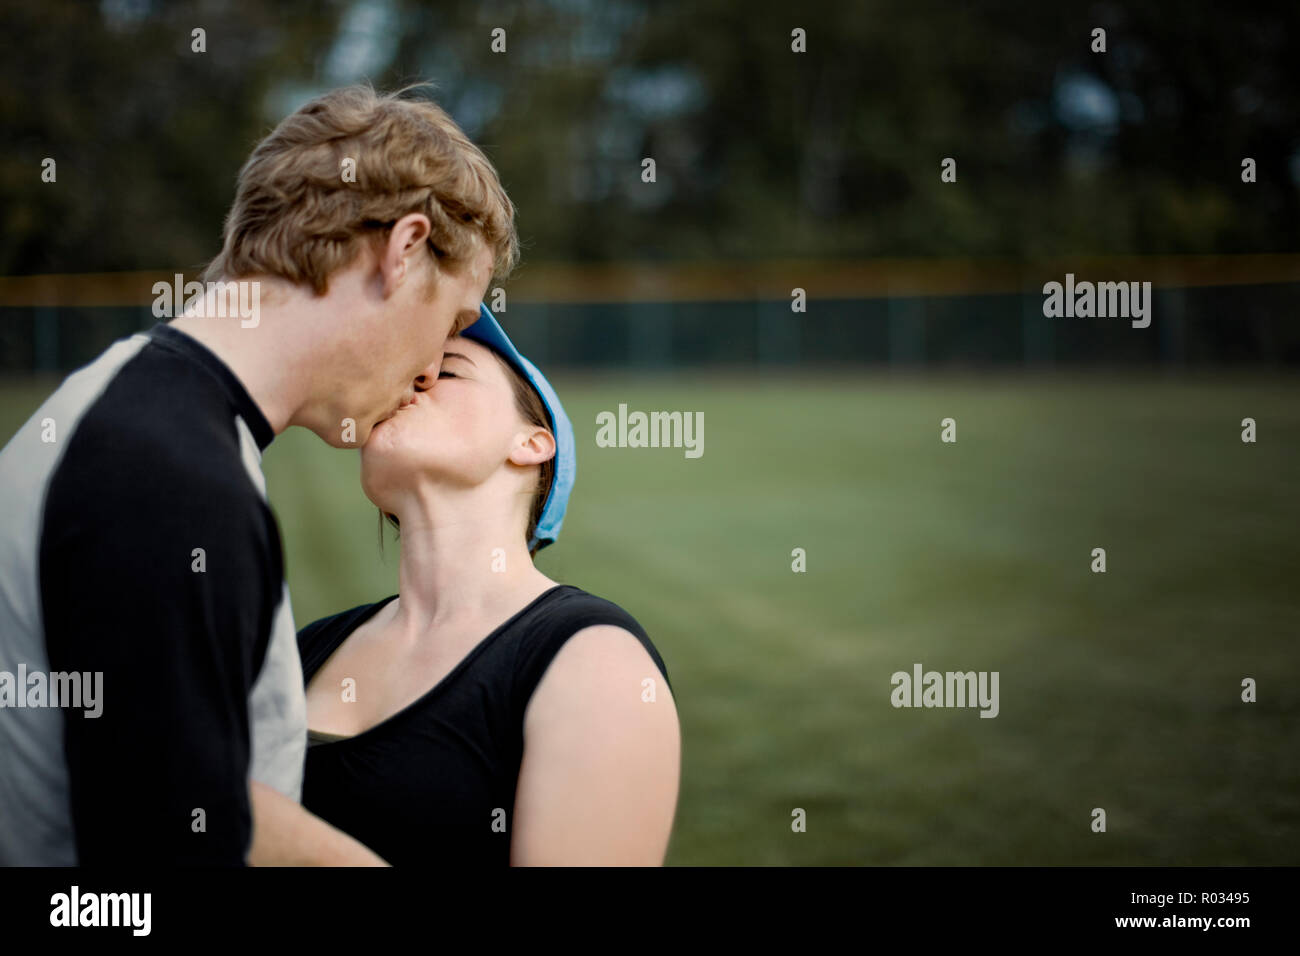 Young adult couple kissing near a sports field. Stock Photo